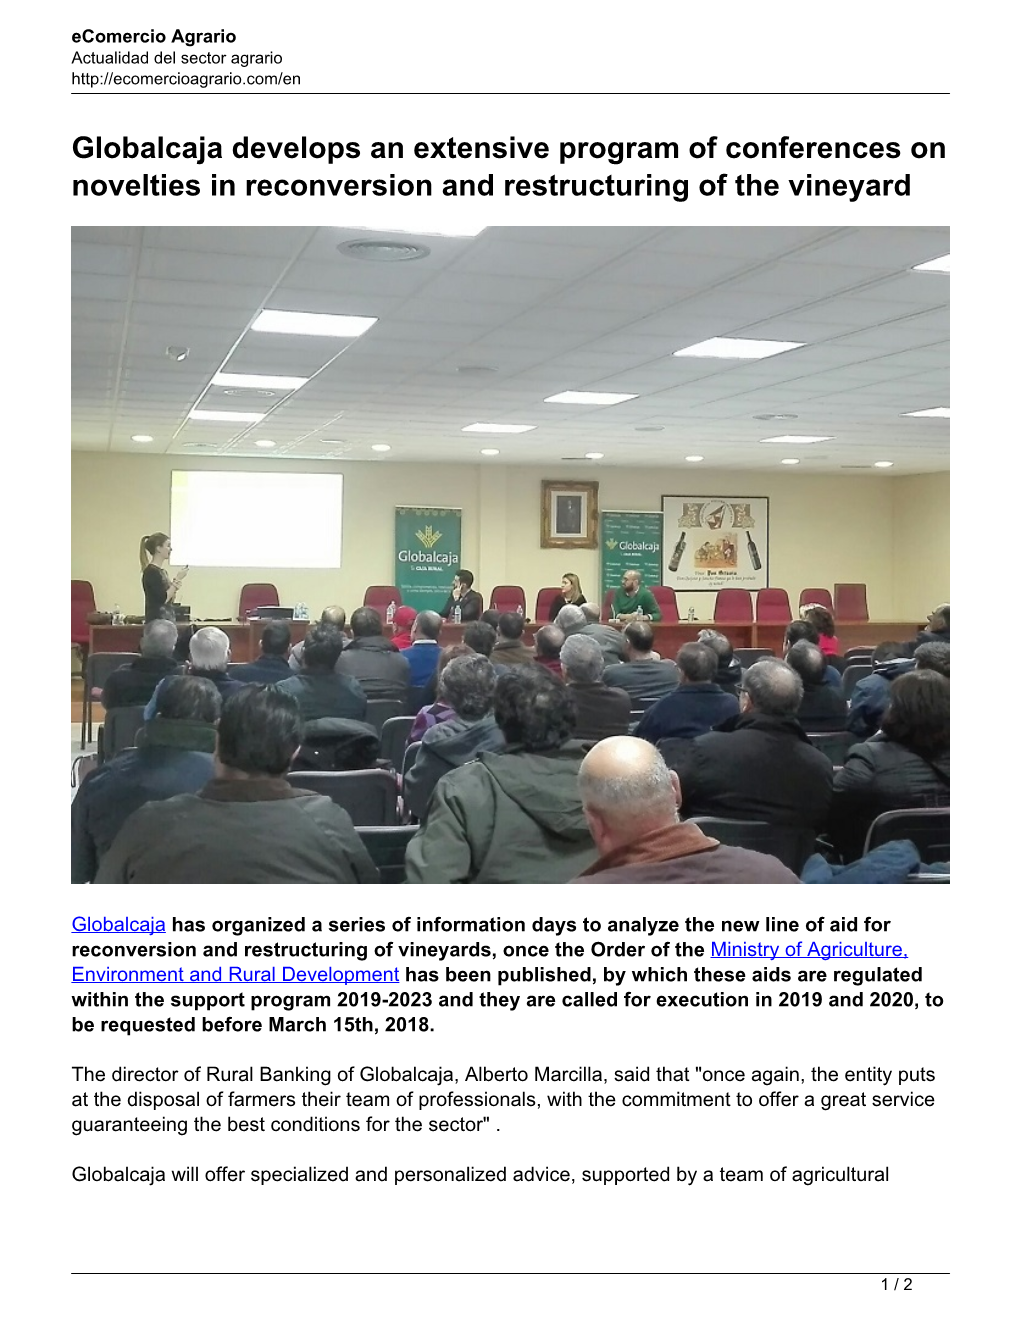 Globalcaja Develops an Extensive Program of Conferences on Novelties in Reconversion and Restructuring of the Vineyard